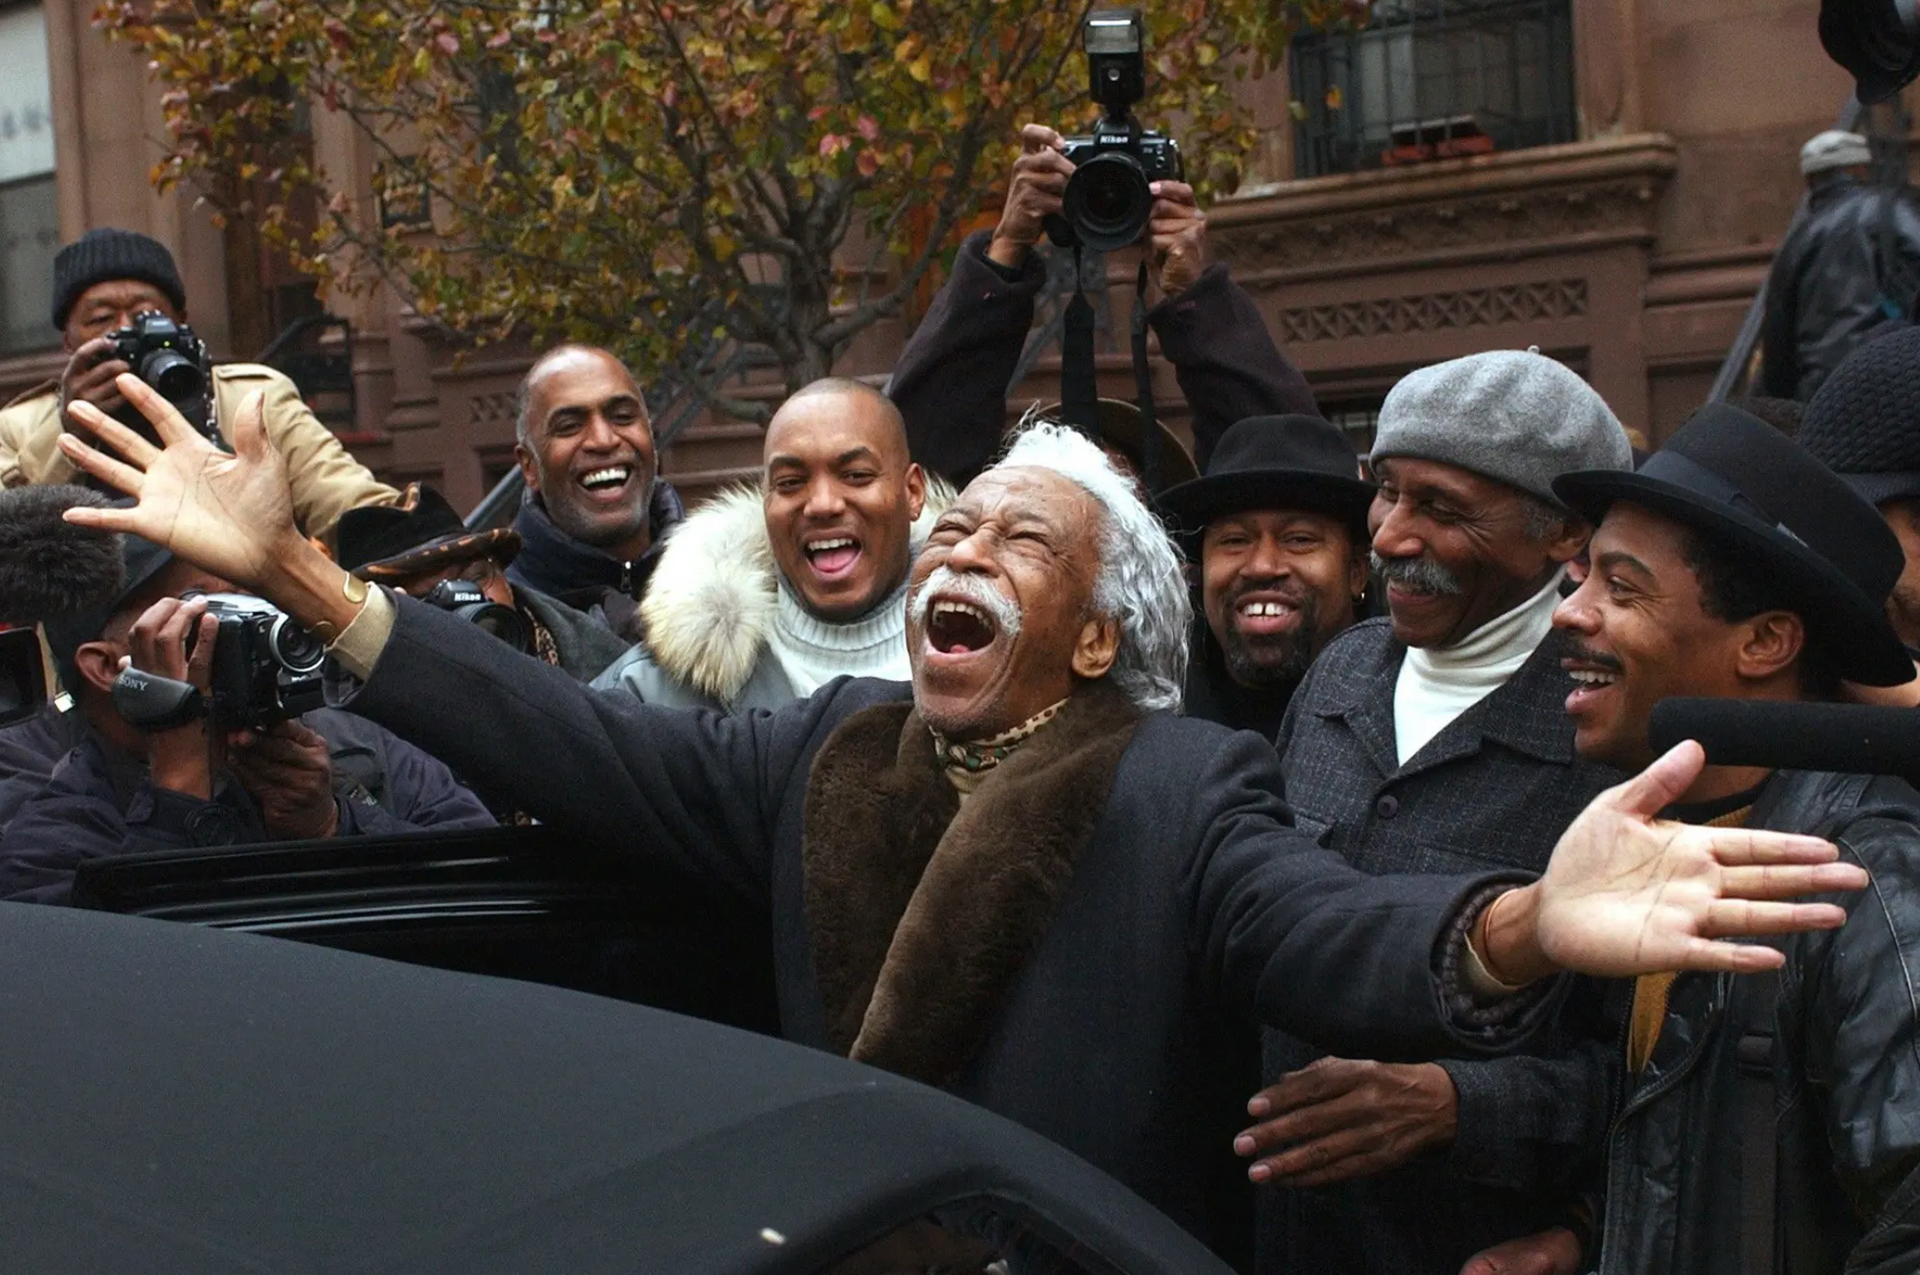 Parks celebrates with fellow photographers following a portrait session featuring himself and 100 other prominent African-American photographers in Harlem, New York, 2002.  Photograph by Suzanne Plunkett / Associated Press. Parks stands with his arms outstretched and joy erupting from his face. He is surrounded by happy looking men, all smiling at him, and a few taking his photo. 